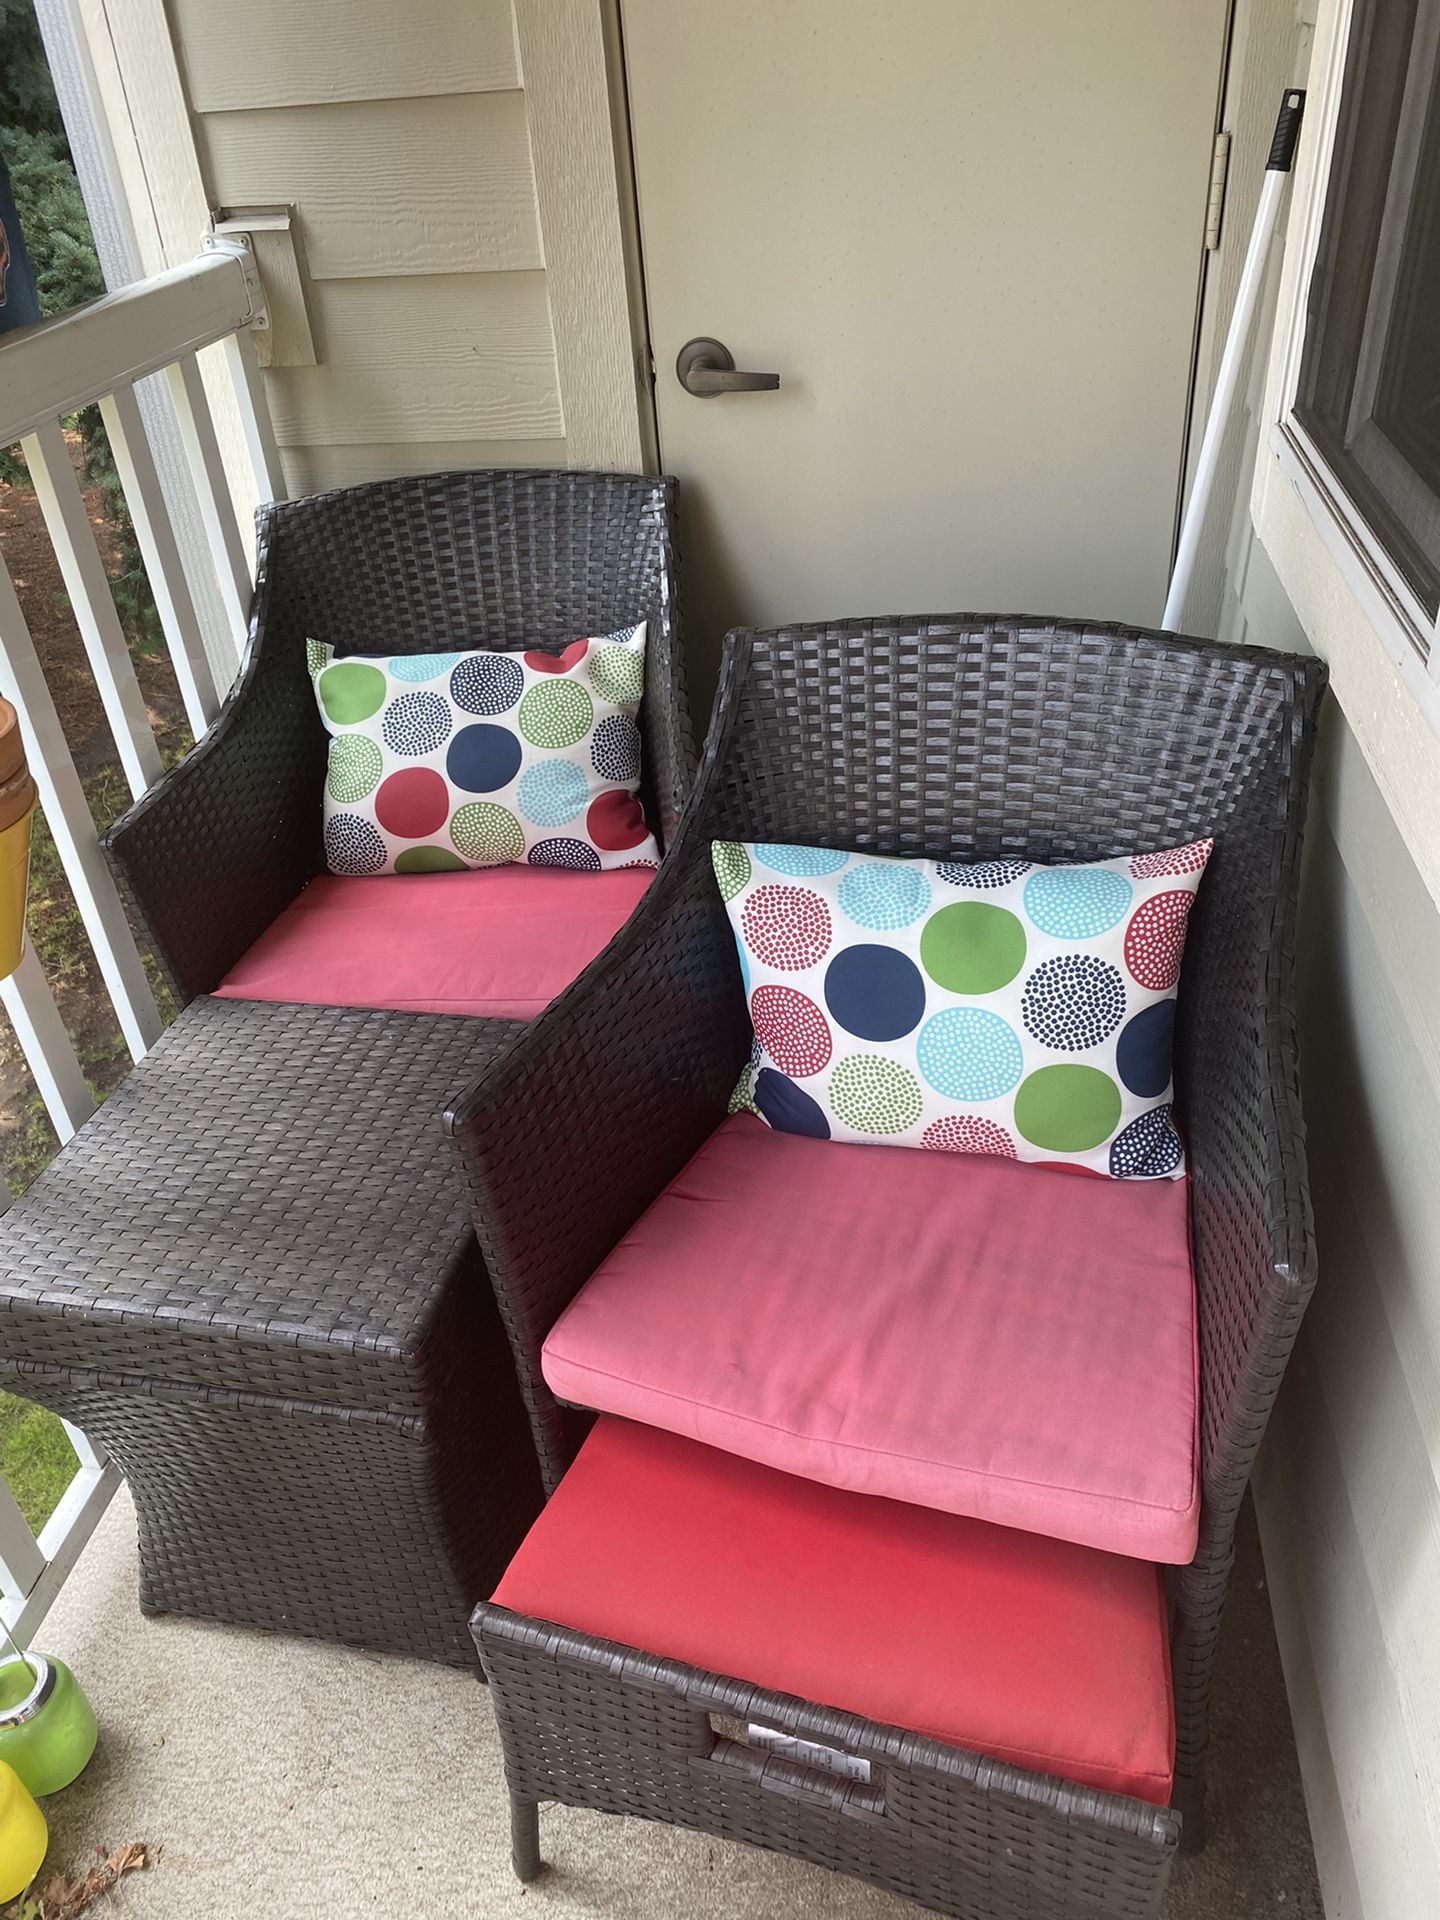 Patio Set - 2 Chairs, Ottomans & Table